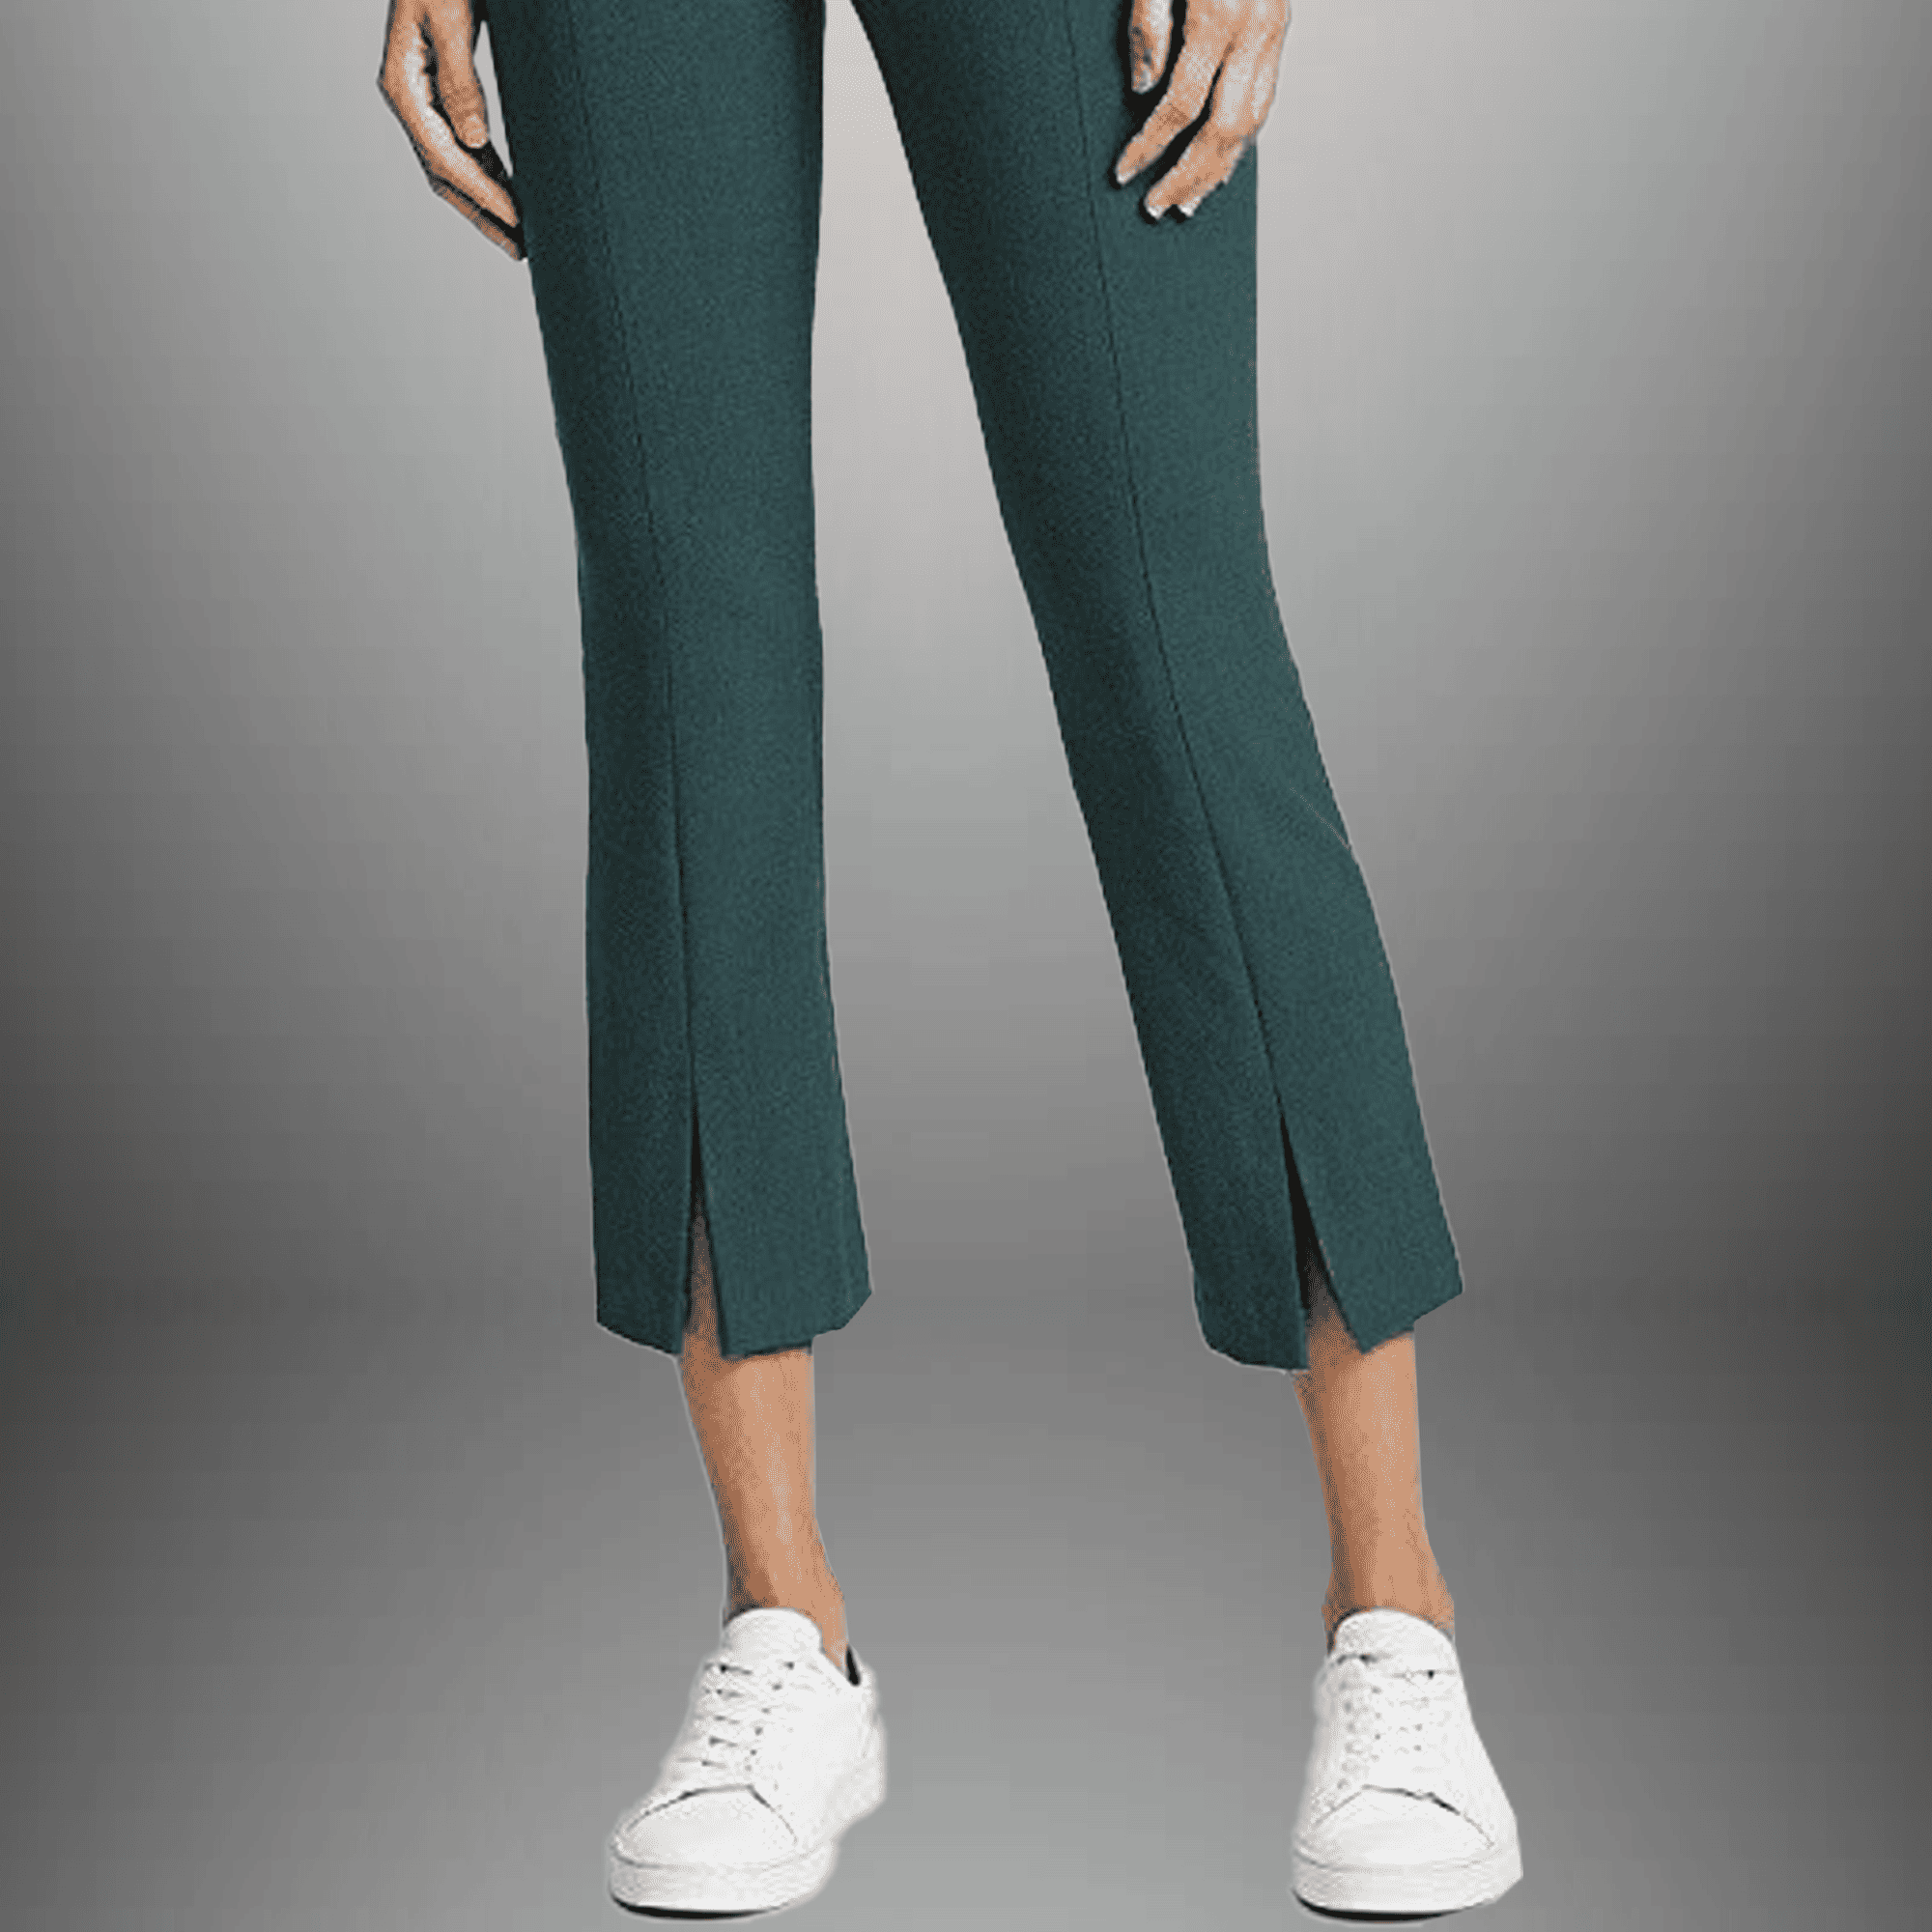 Women's front cut teal blue stretchable casual pants-RCP026